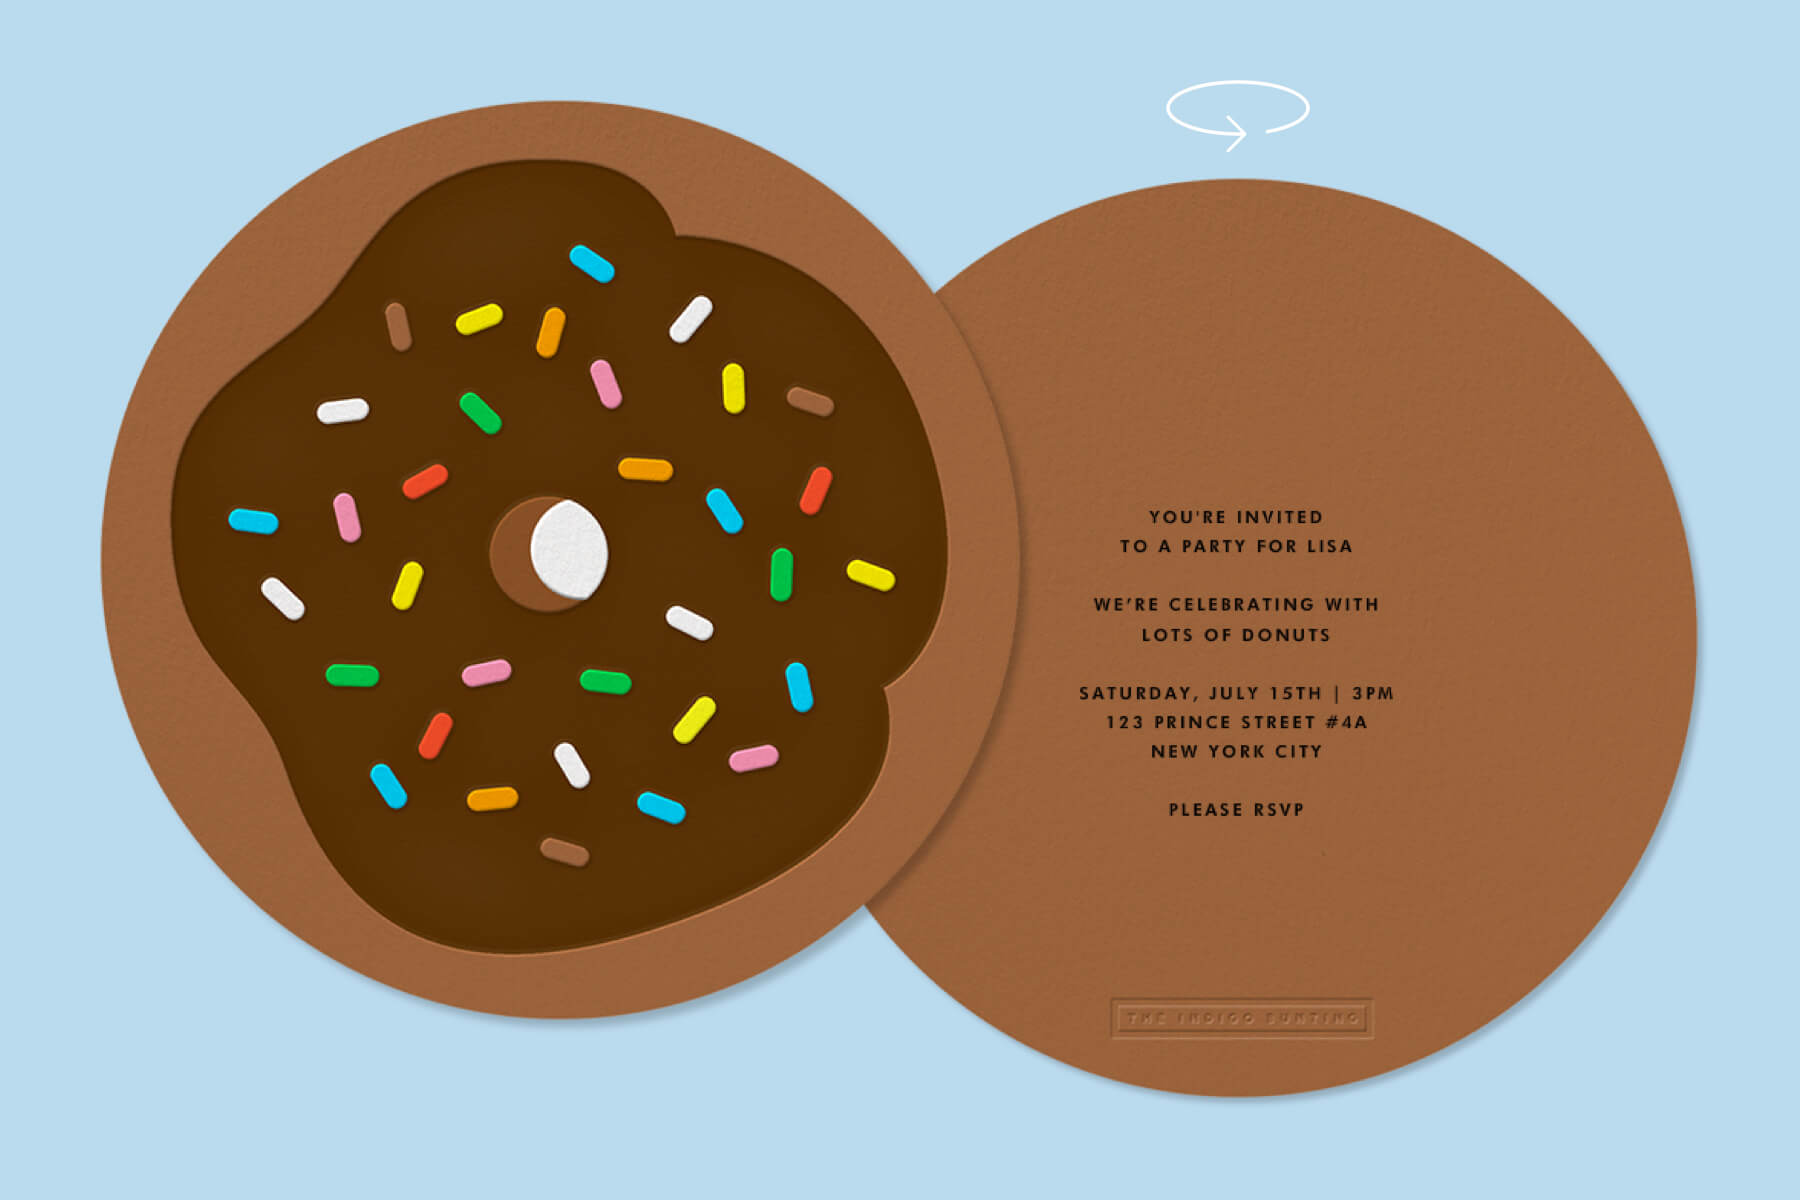 Chocolate donut with sprinkles on top invitation for birthday parade